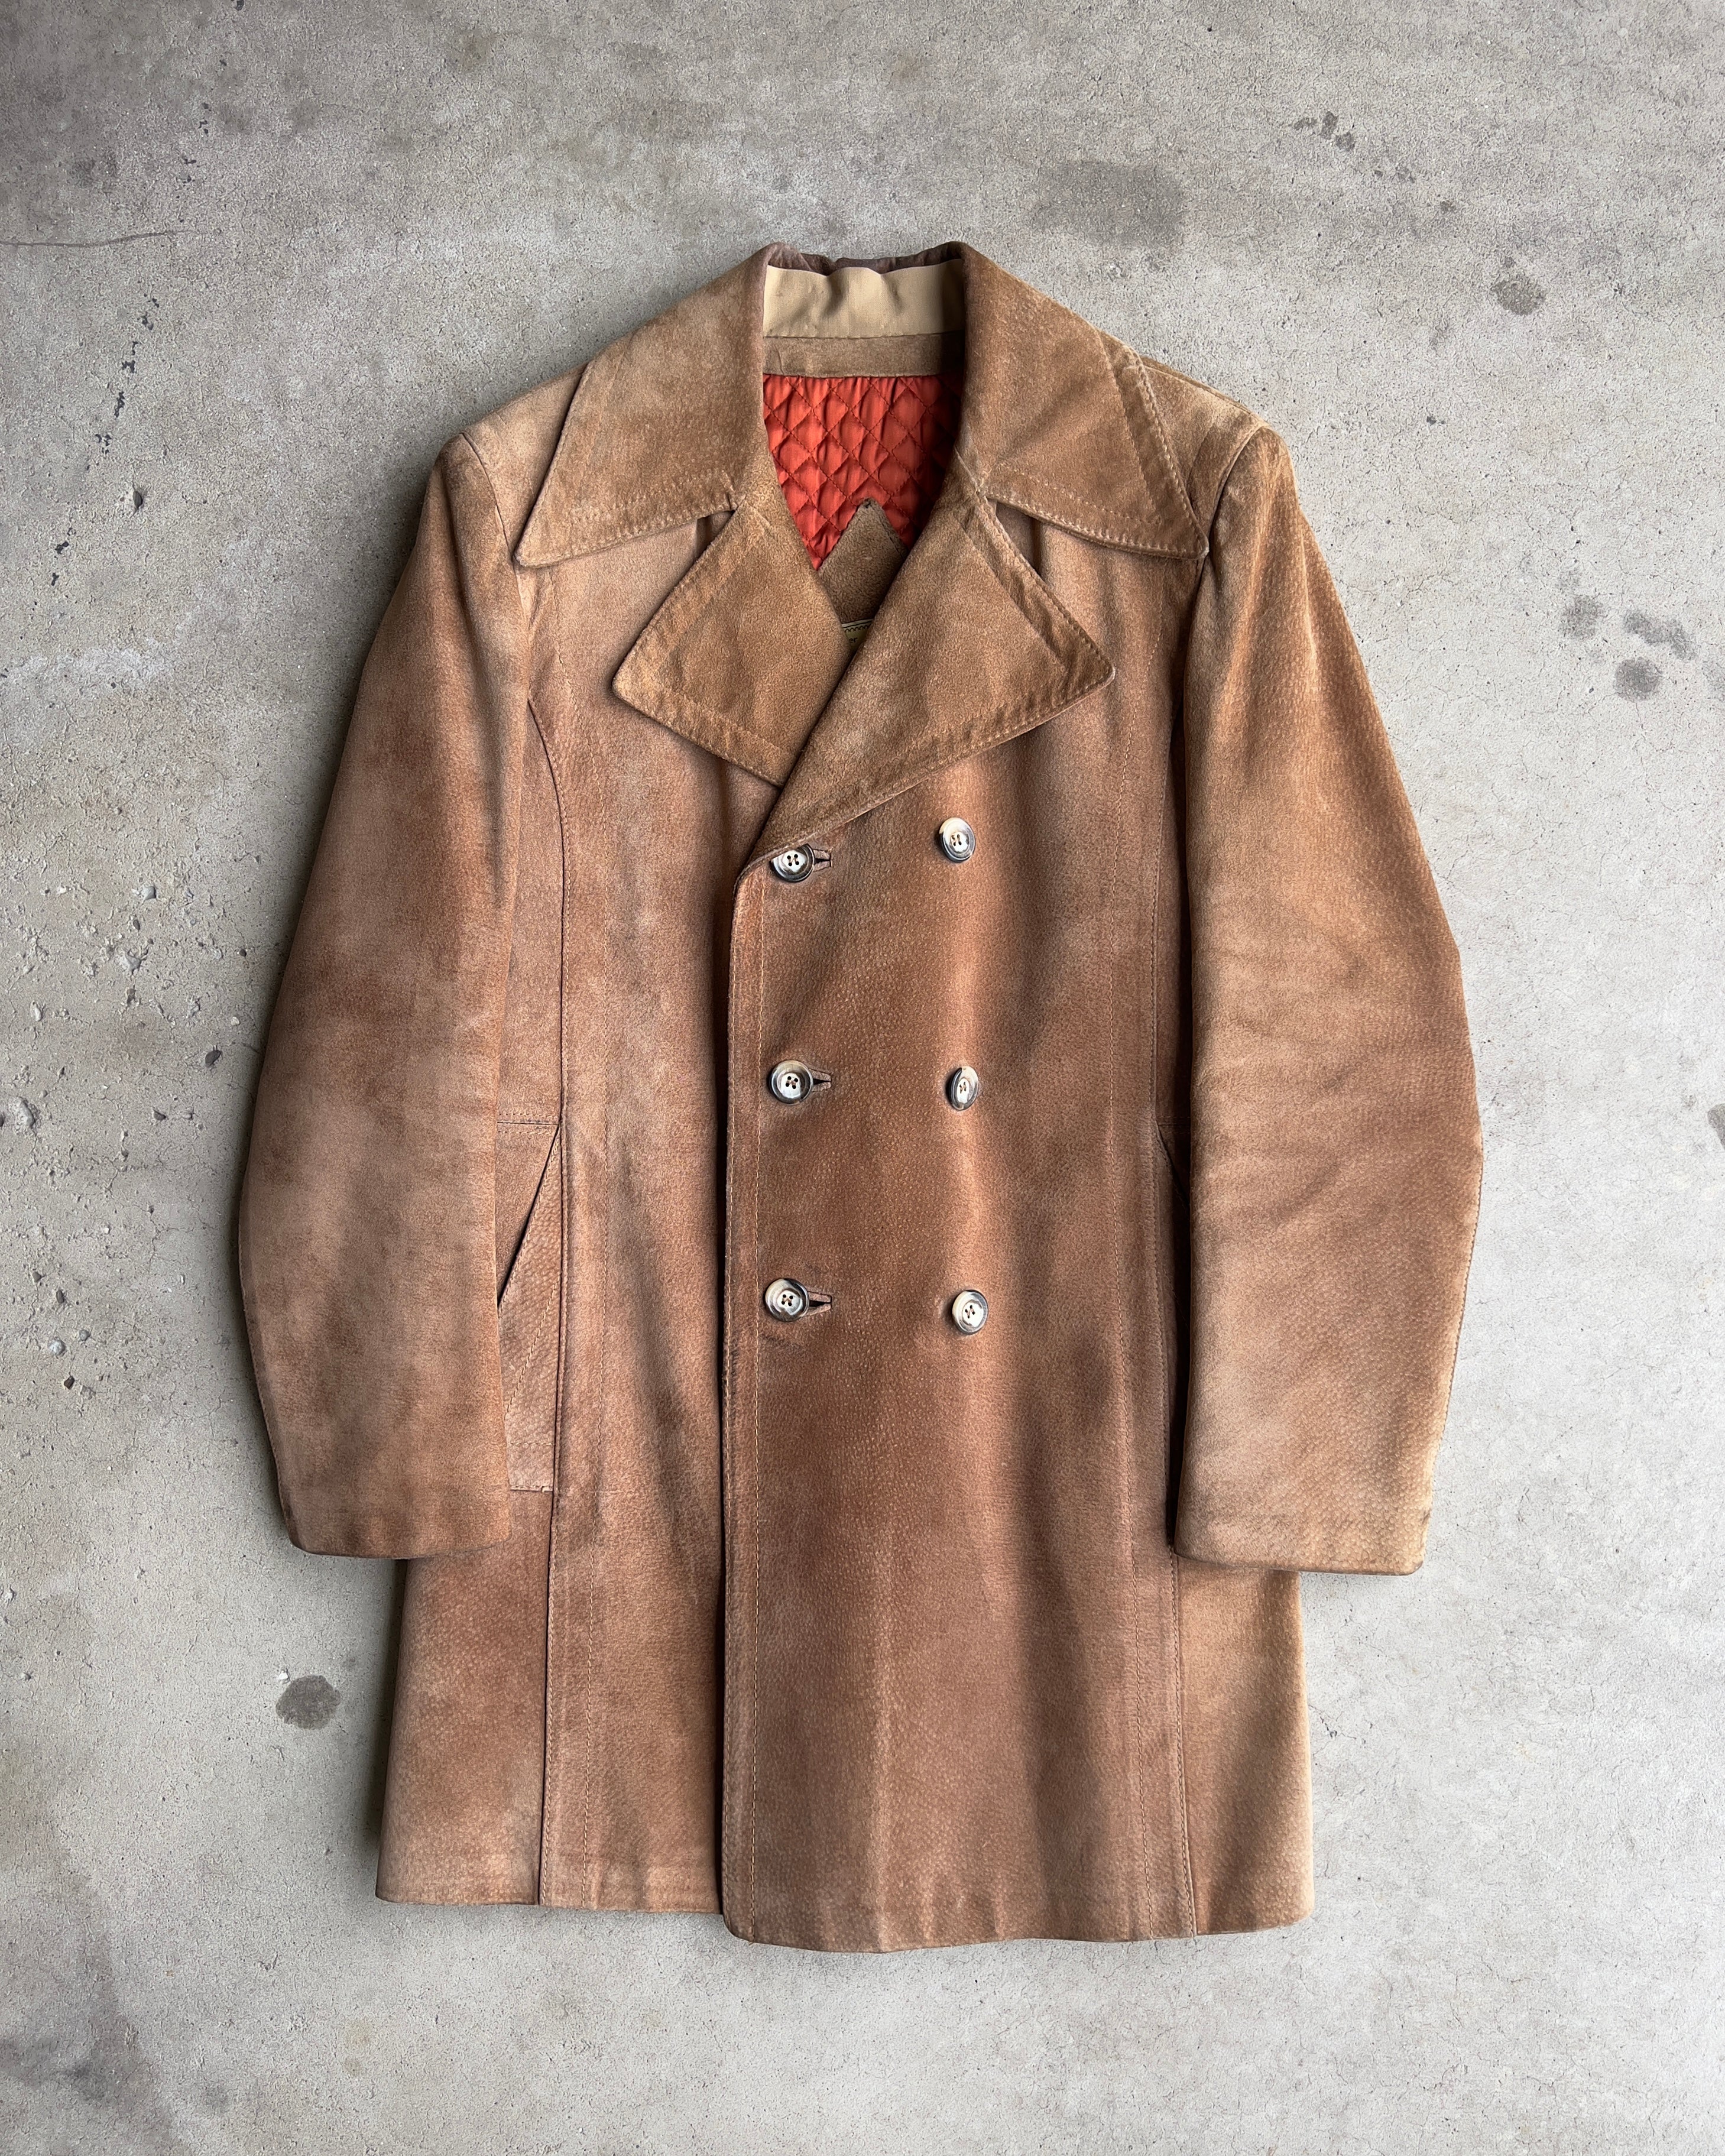 1960s Genuine Suede Leather Satin Lined Trench Coat